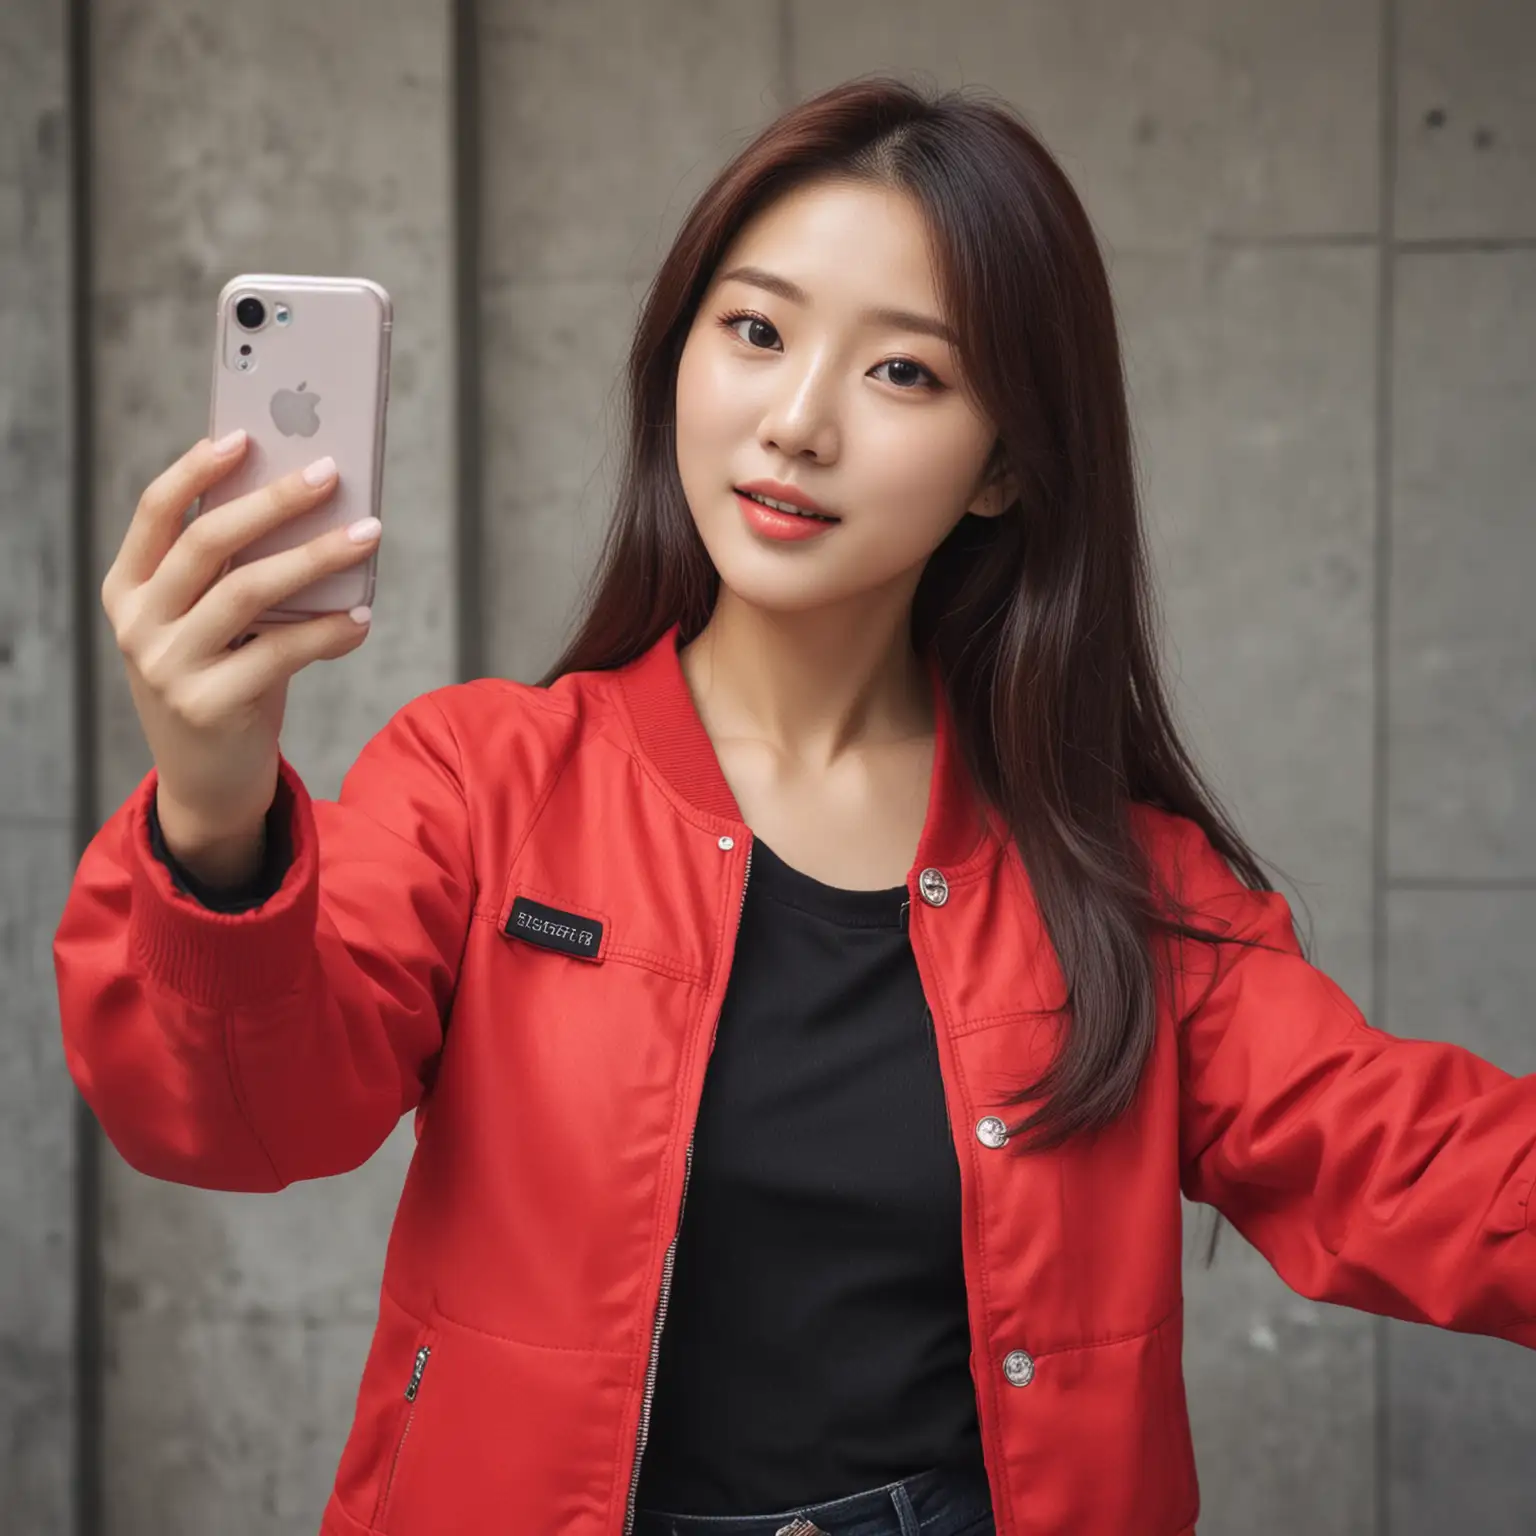 Stylish Korean Woman in Red Jacket Capturing Selfie Moment